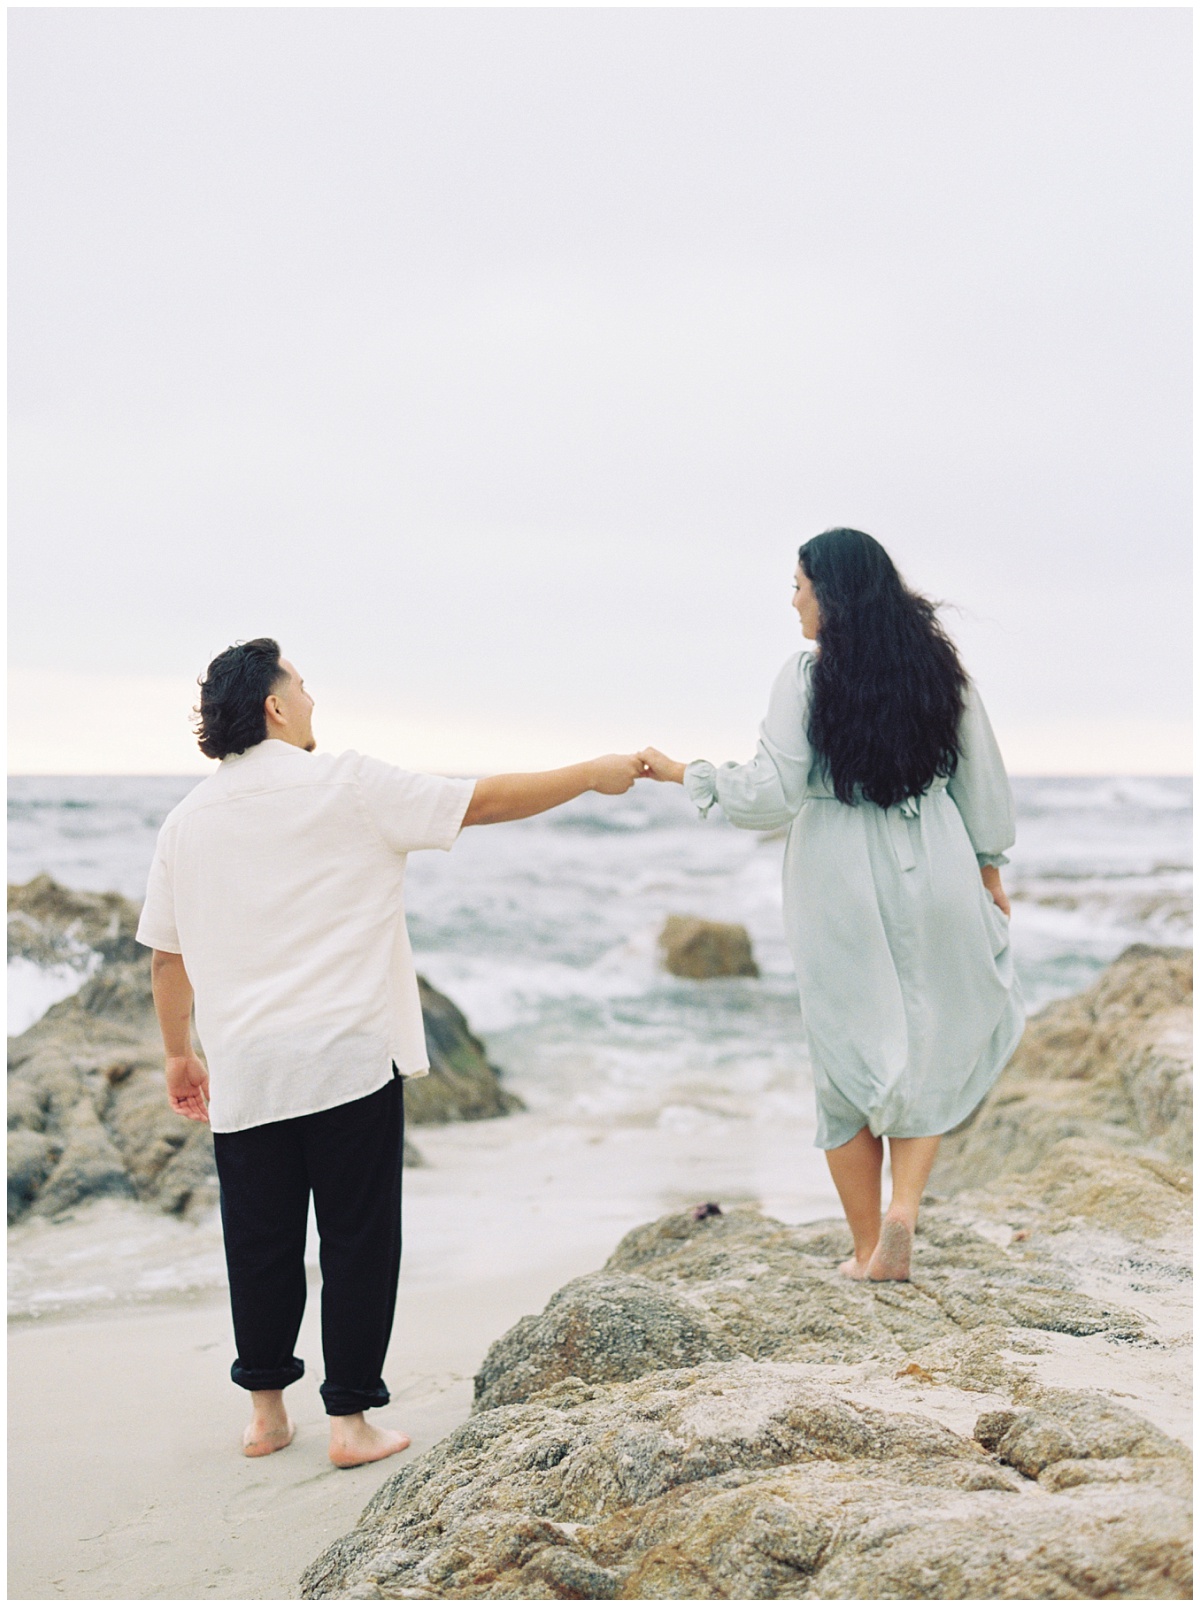 Film Portra 800 of couple at the beach holding hands and playing